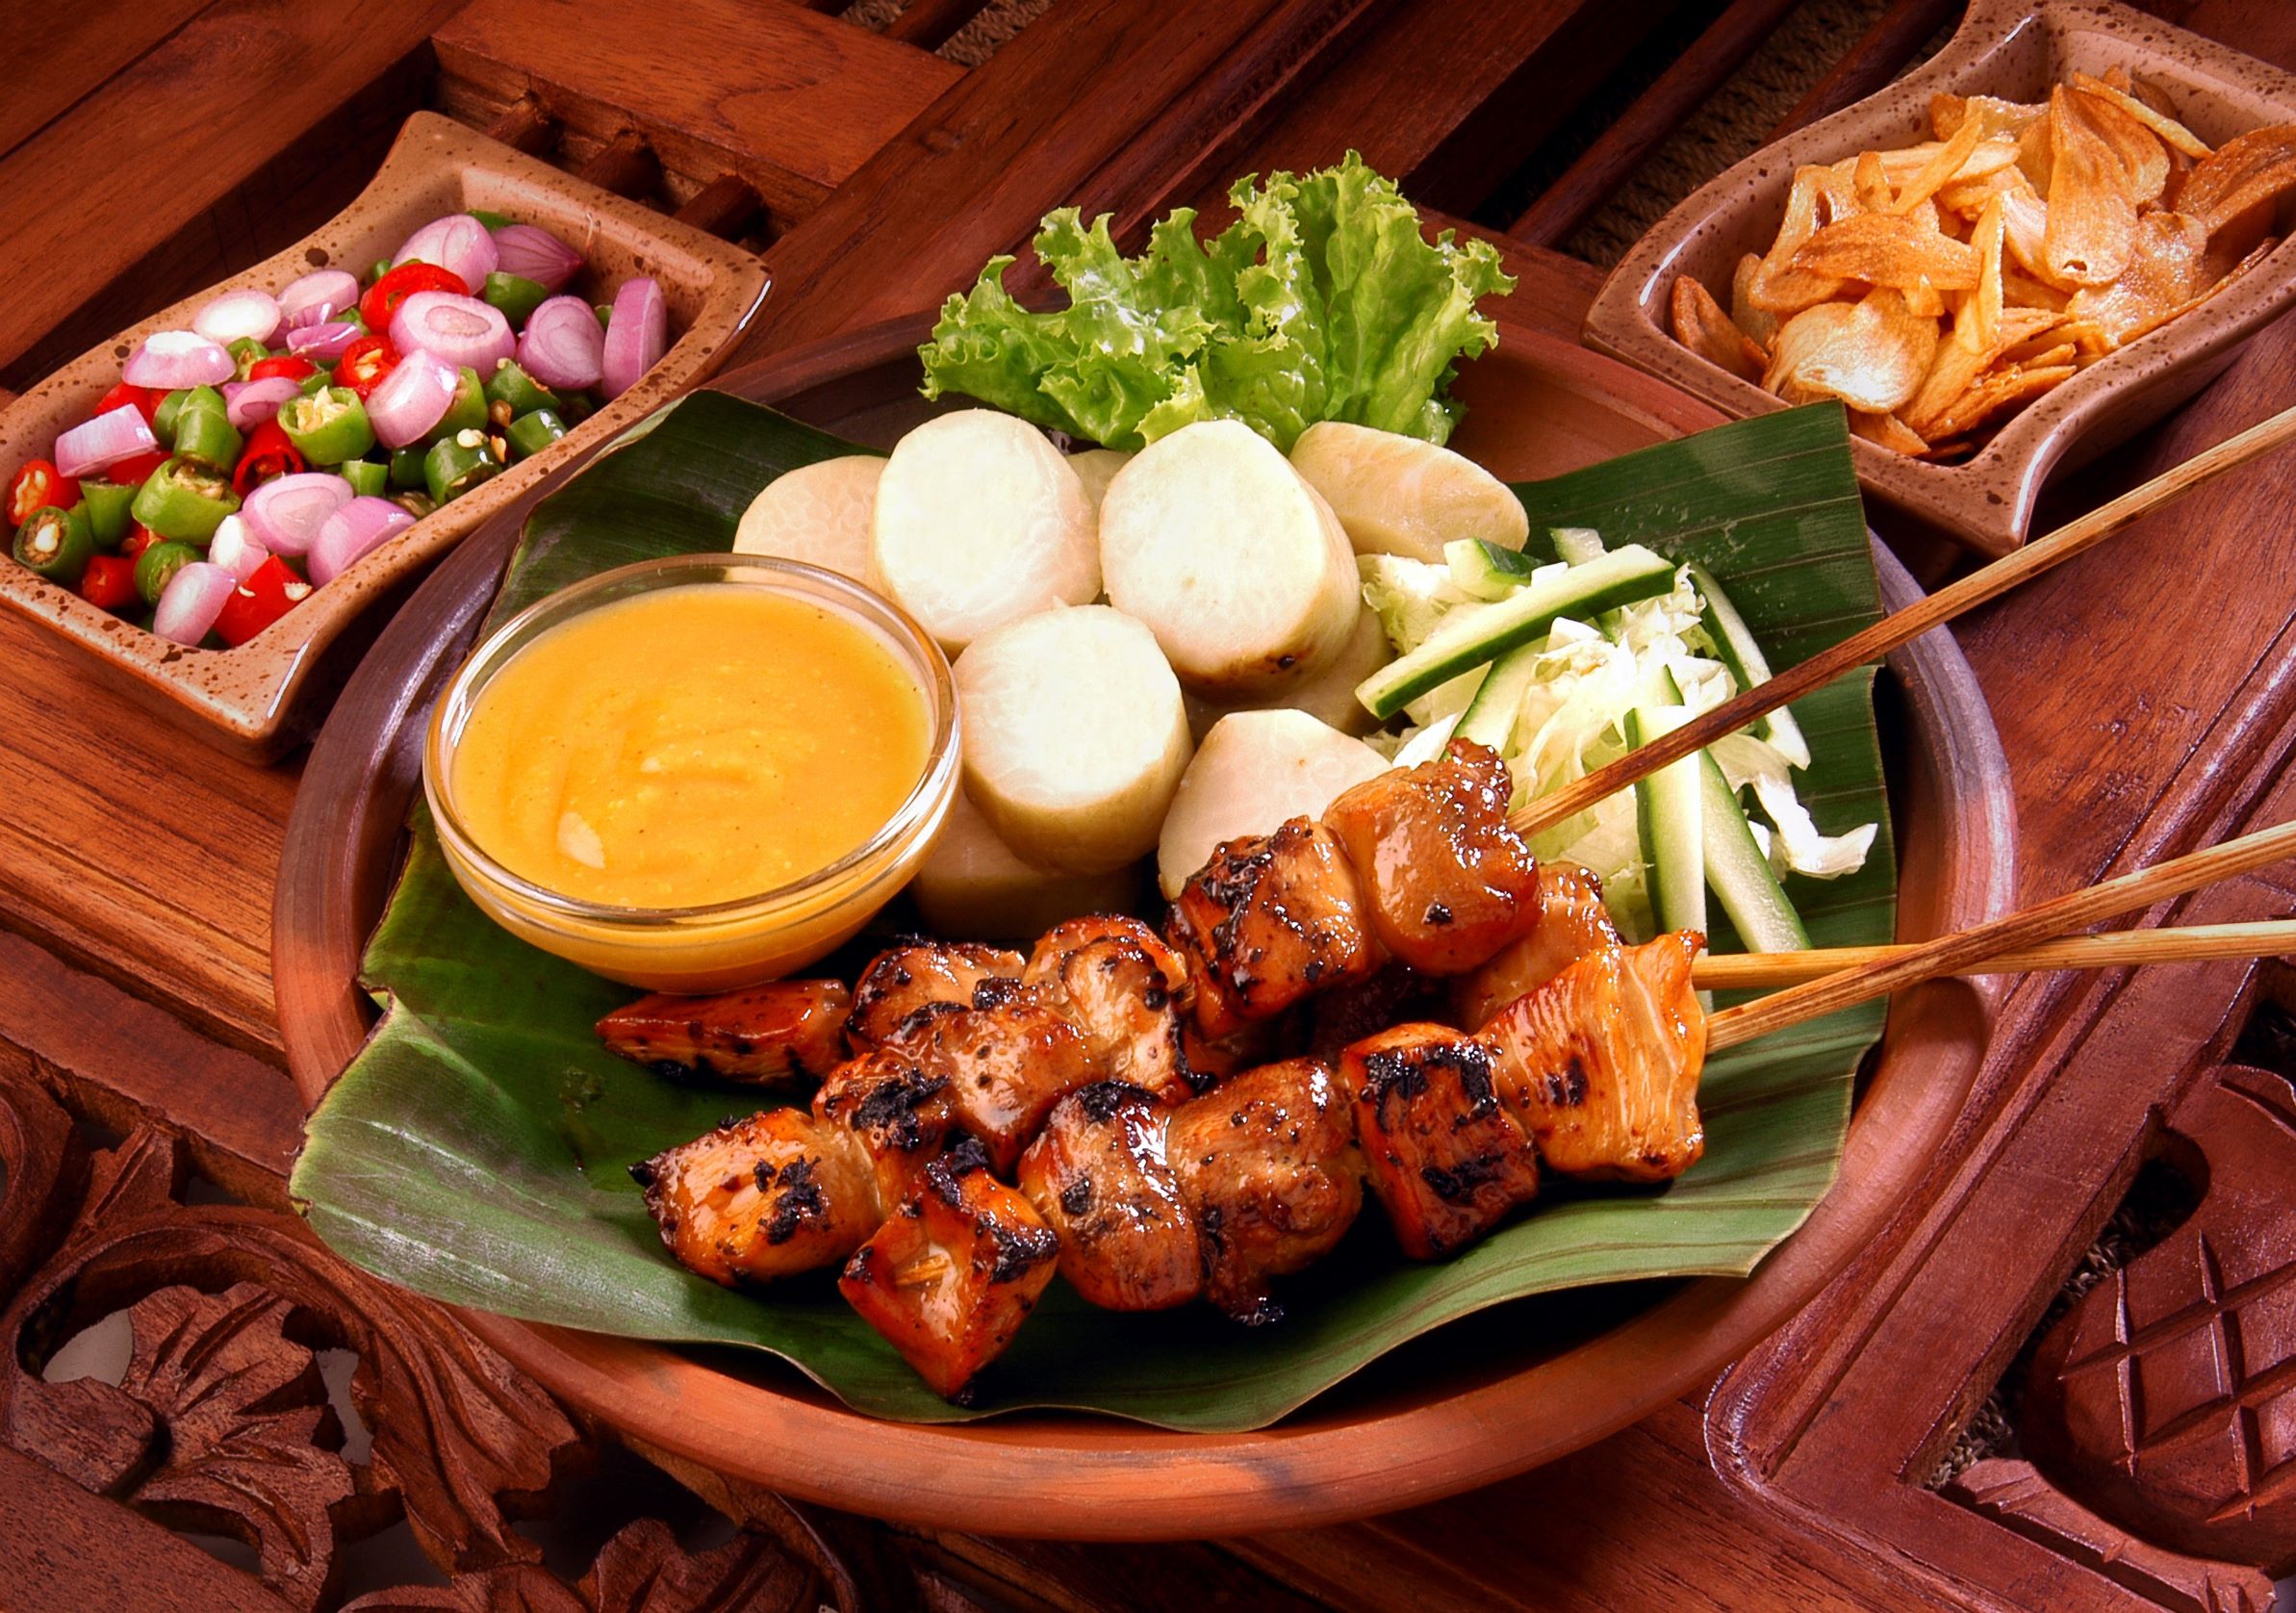 Satay, a national dish in Indonesia